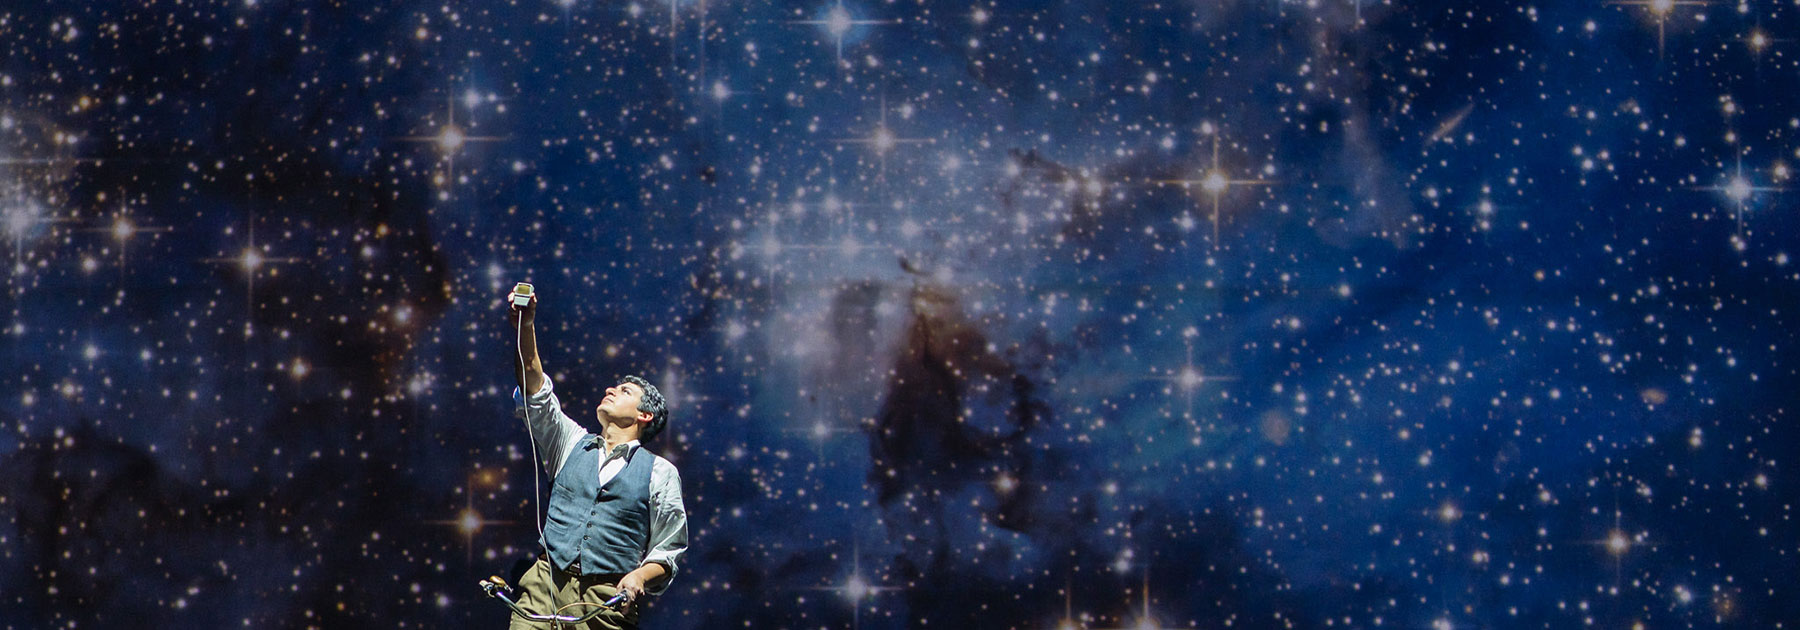 Performer on stage in front of a blue, starry backdrop